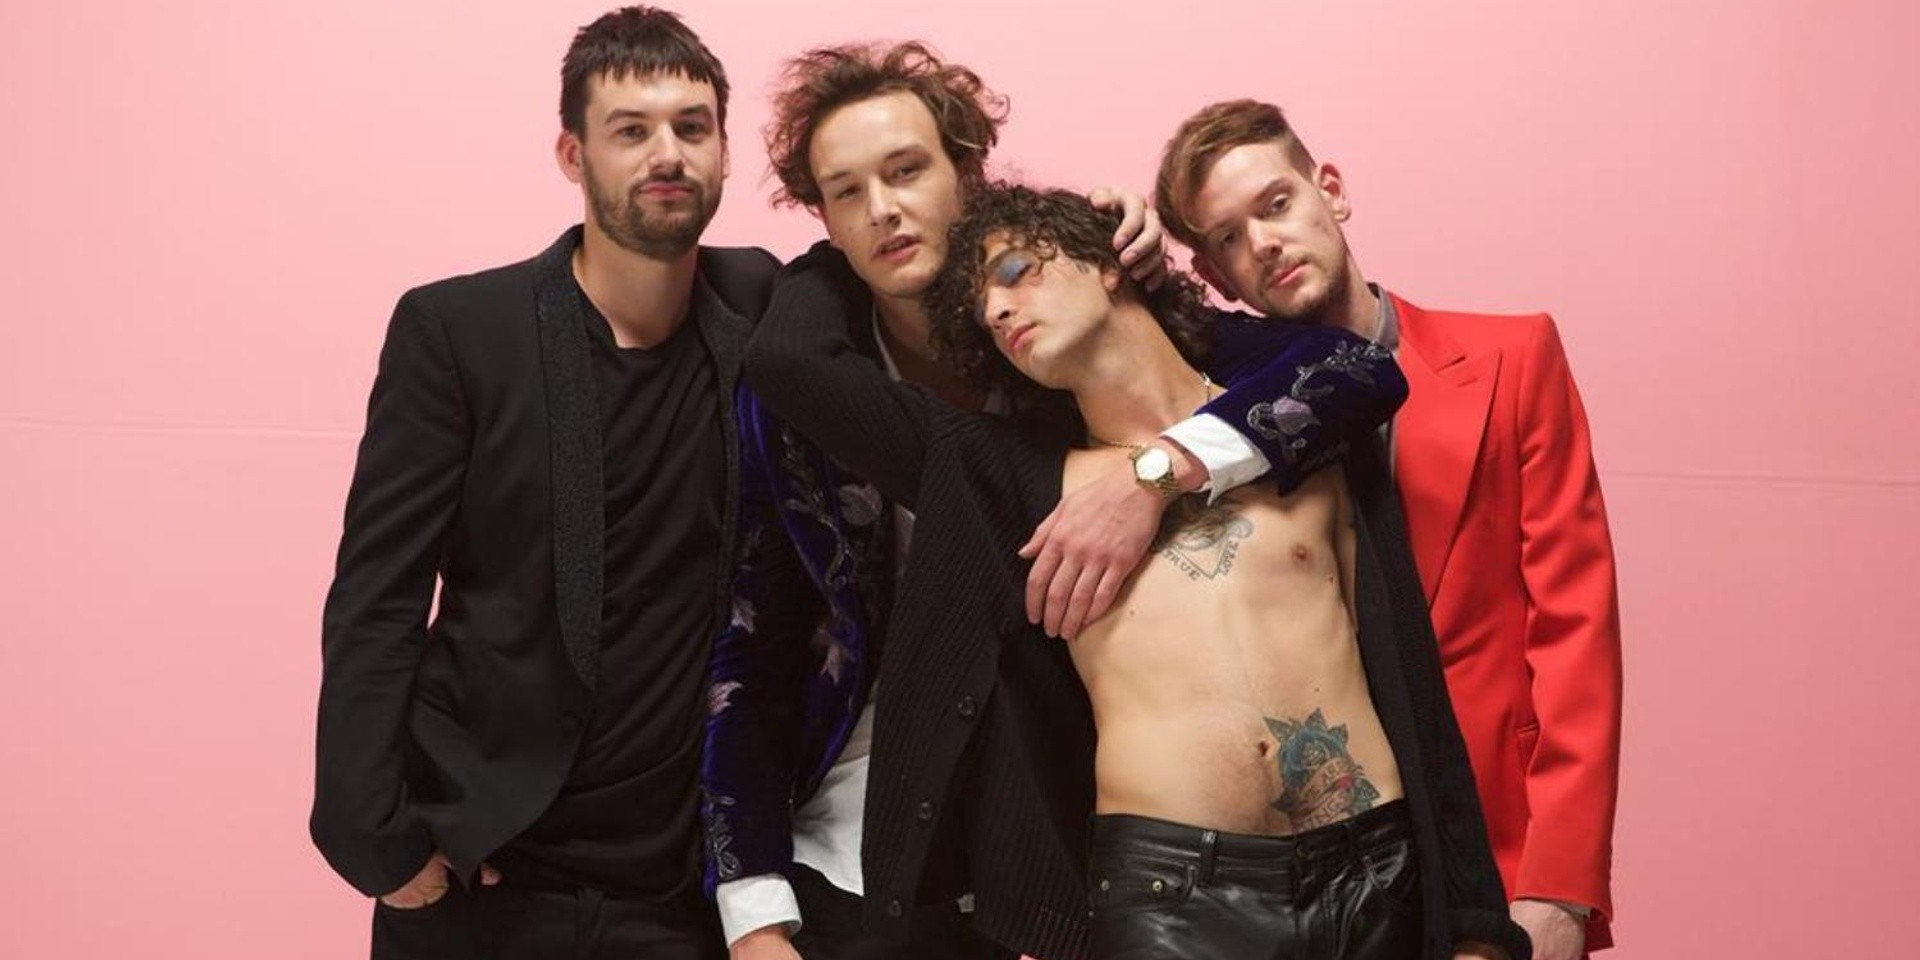 Universal Music Singapore and Swee Lee Social Club announce The 1975 pop-up fan event